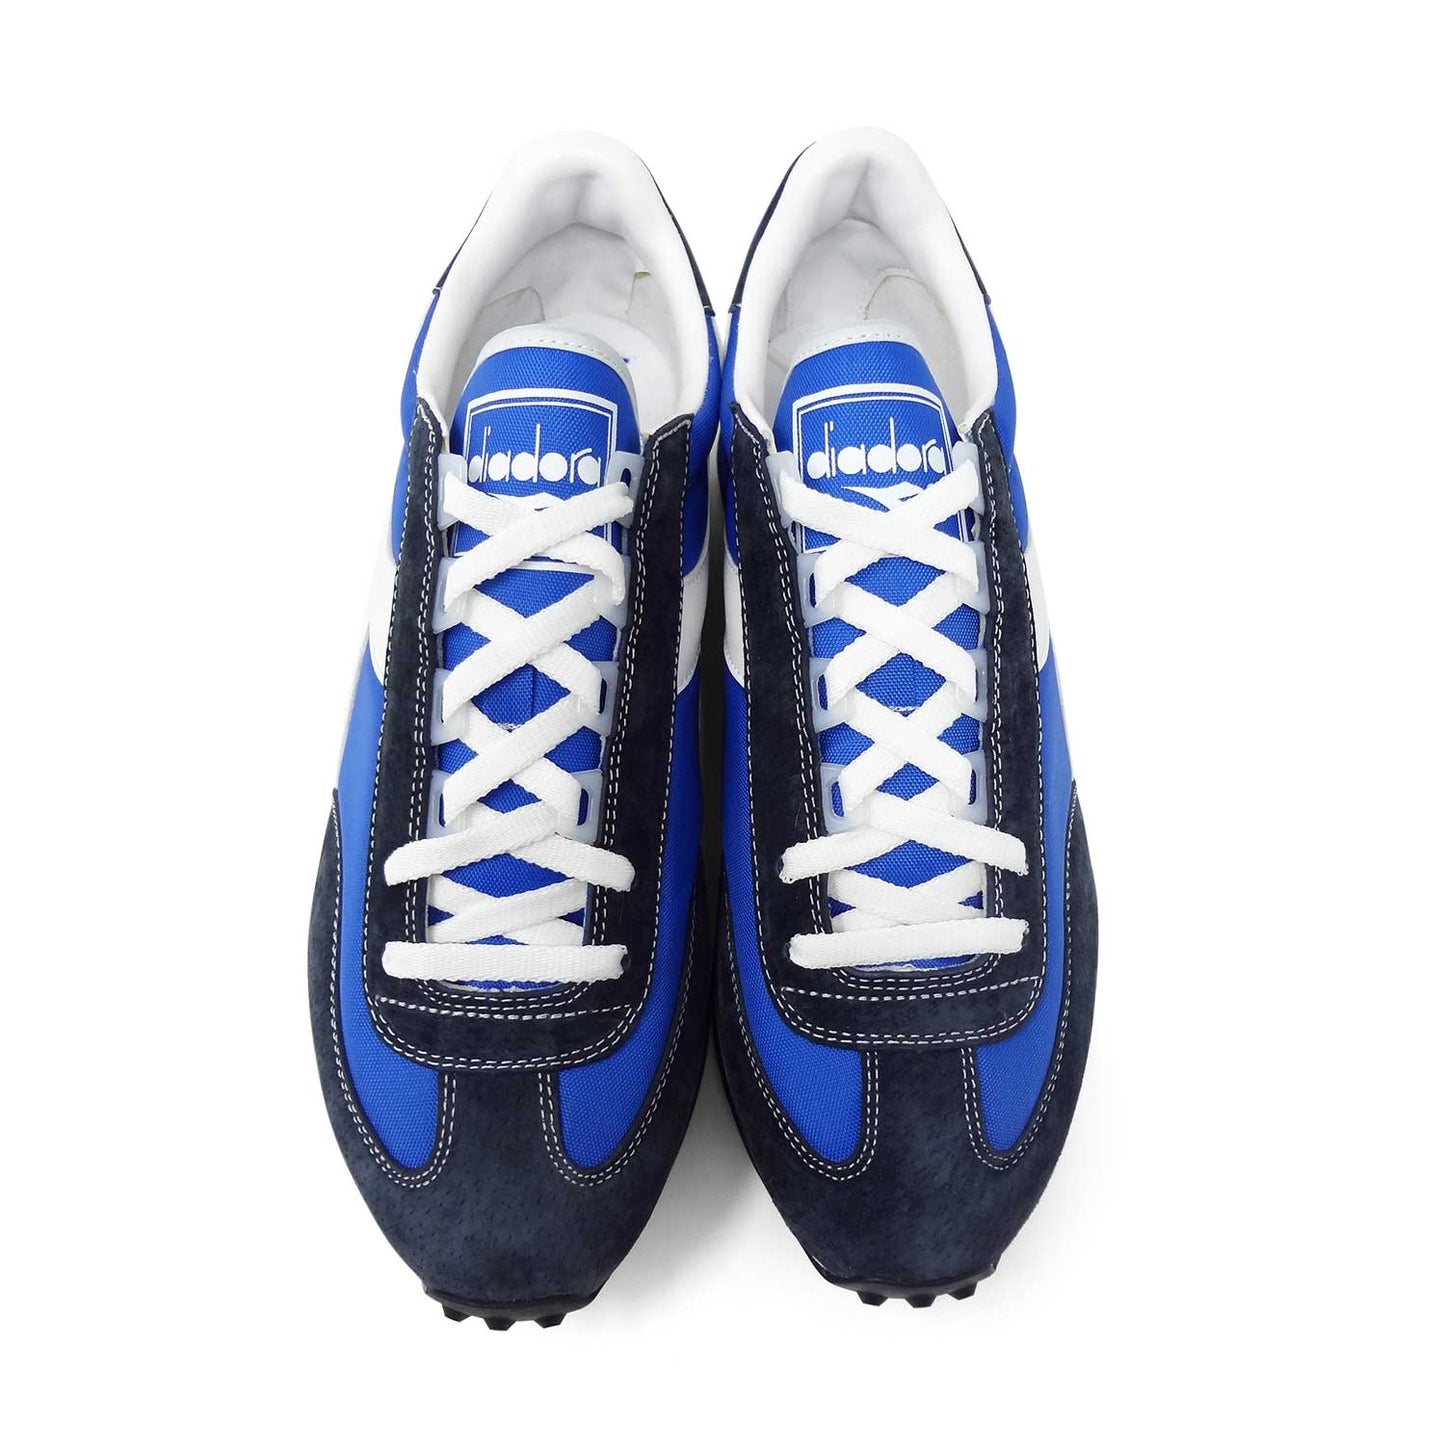 Diadora Rally 1970s Style Retro Men's Sneakers Running Shoes Blue White Aerial View